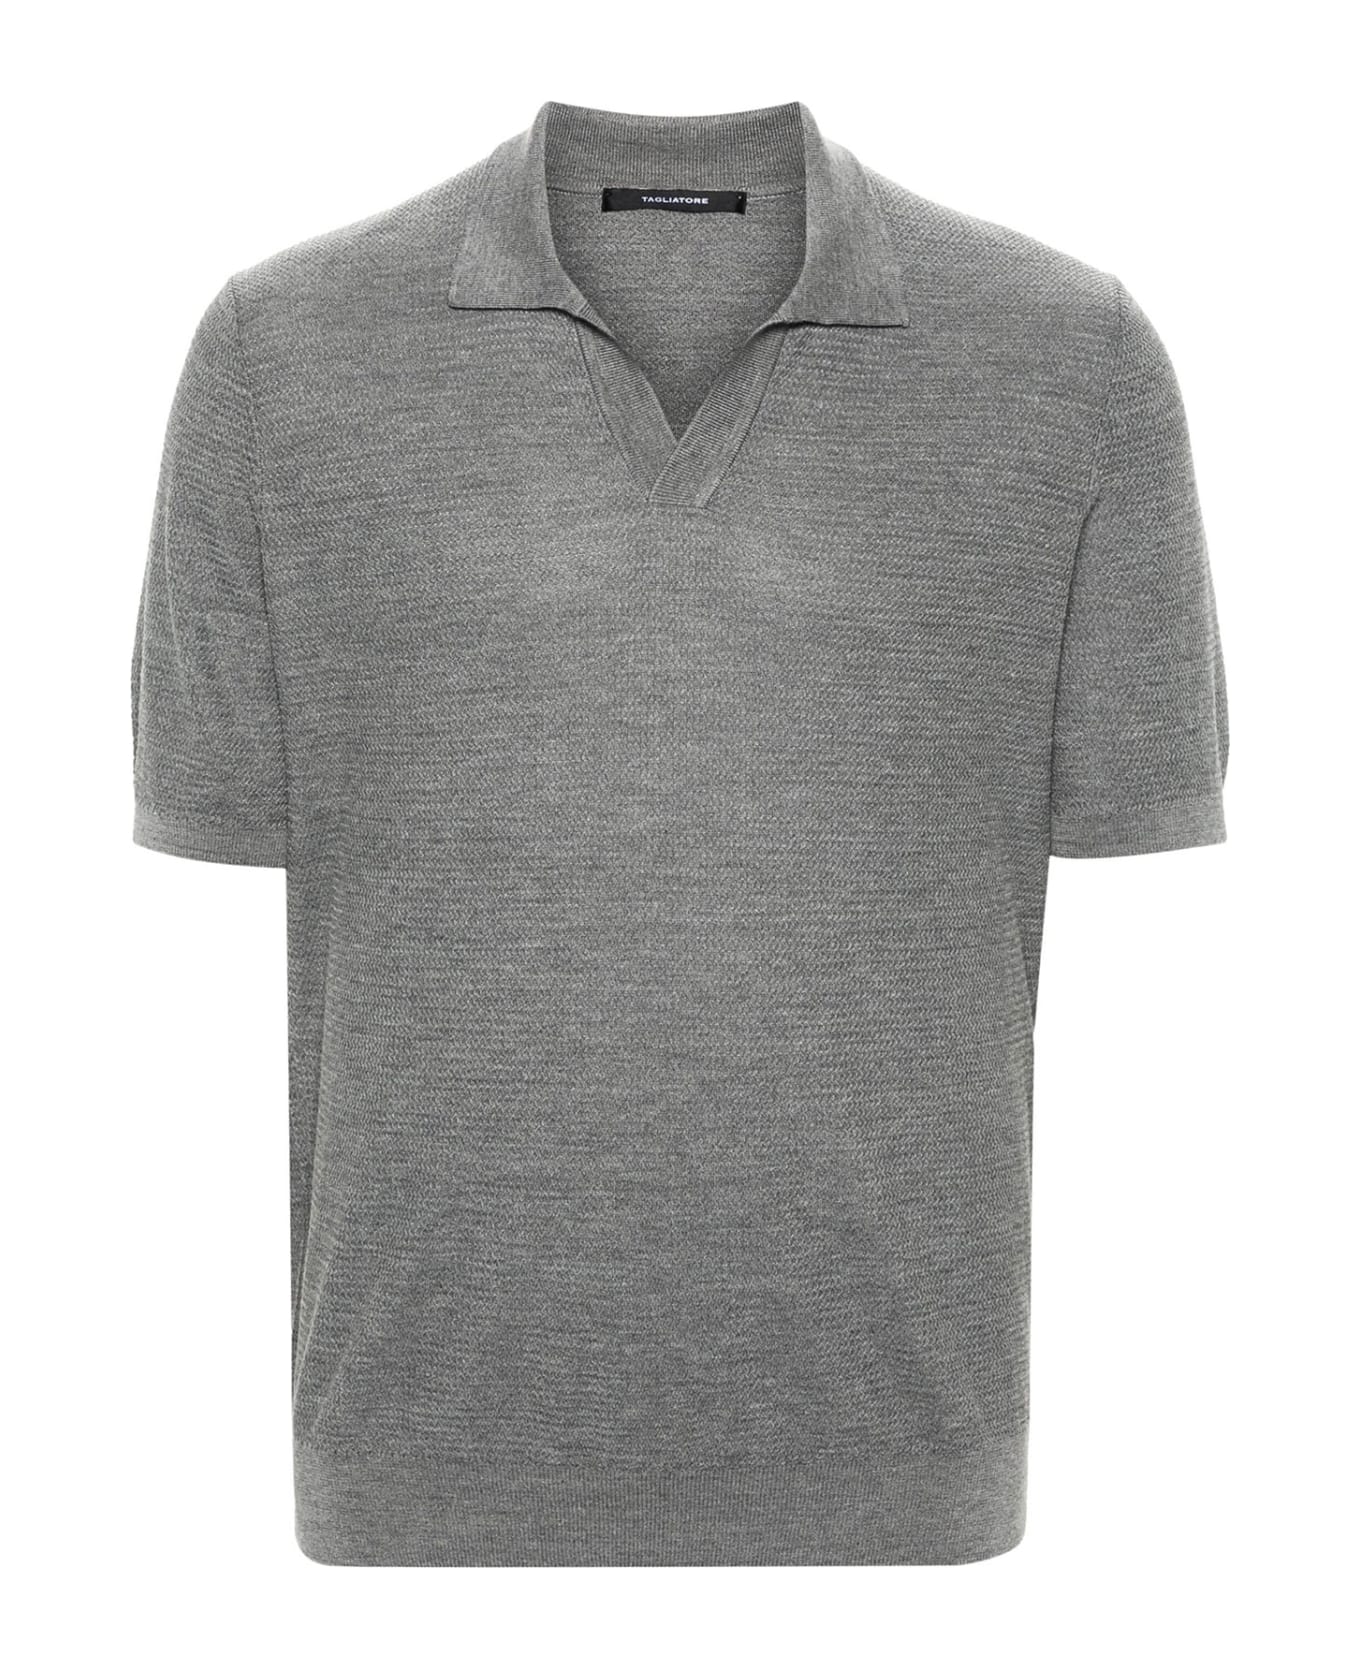 Tagliatore Gray Polo Shirt With Short Sleeves - GRIGIO/SILVER ポロシャツ